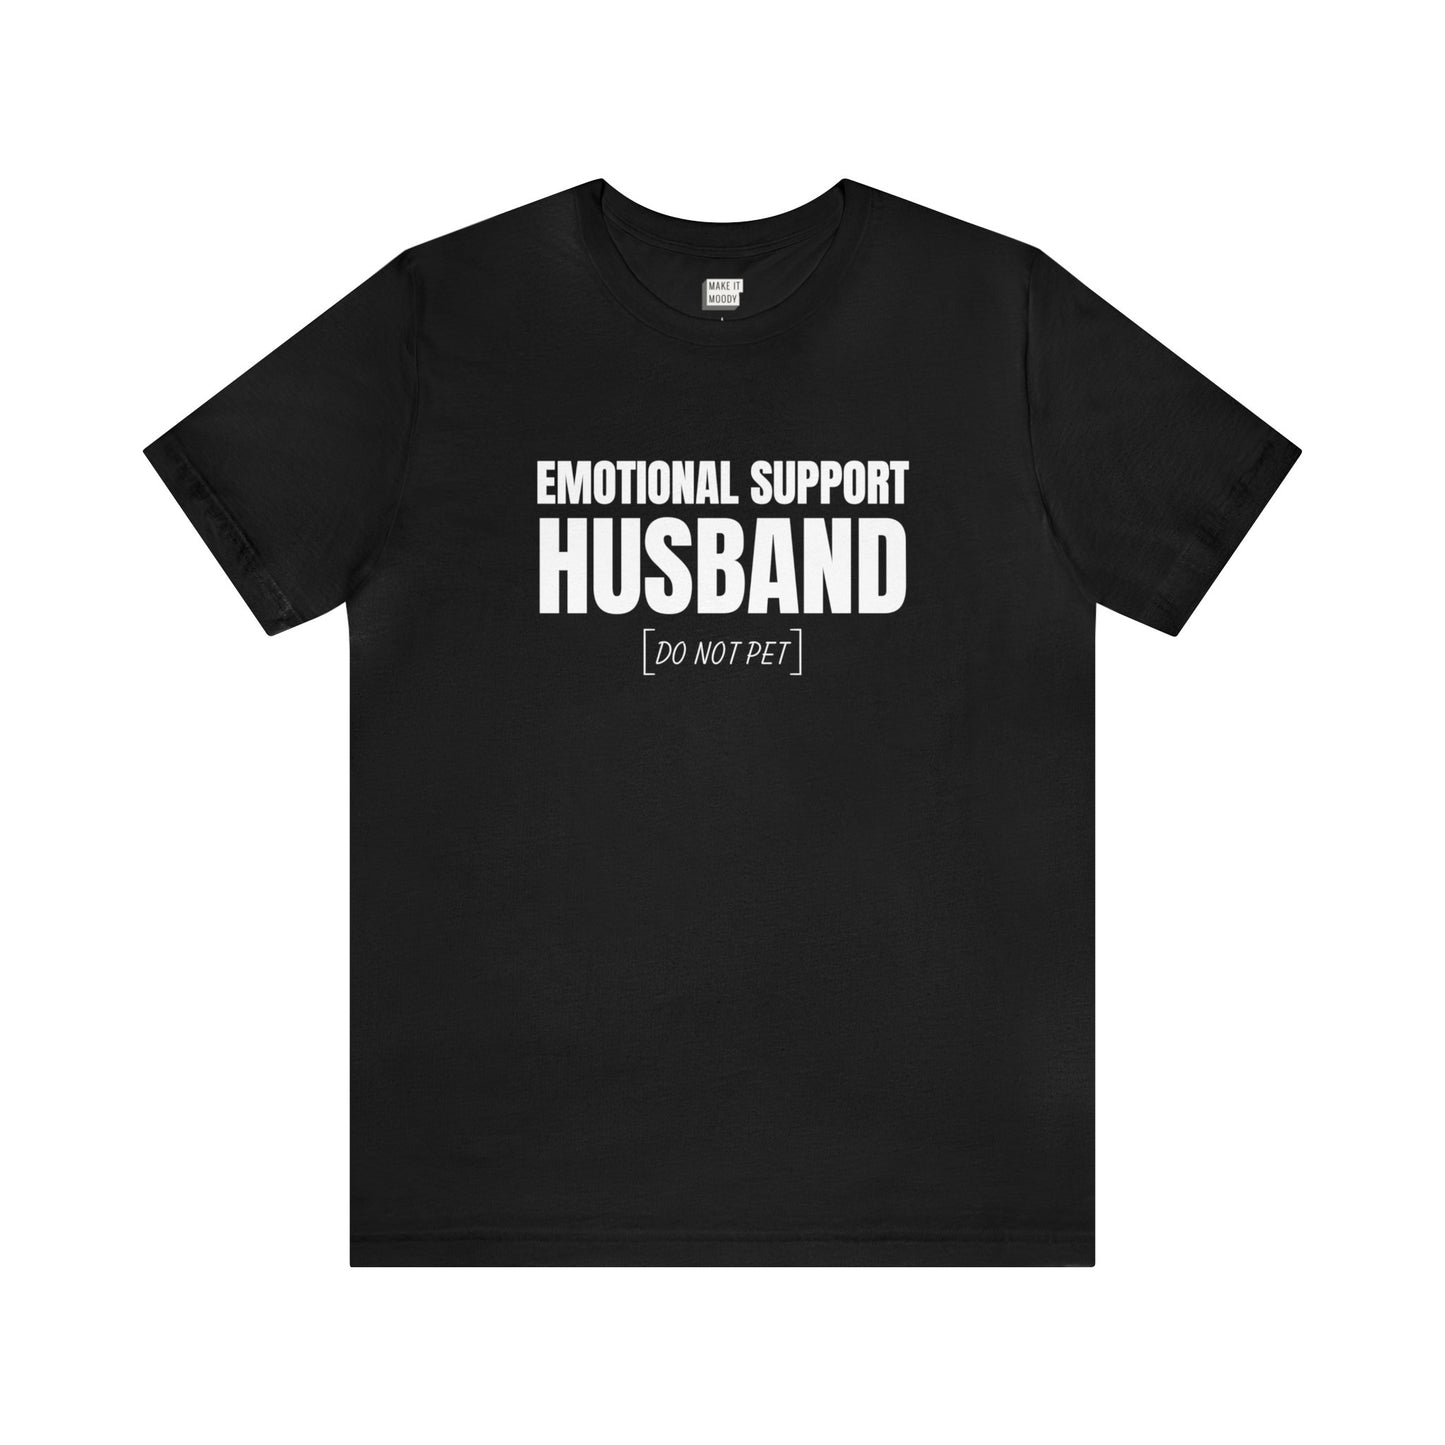 "Emotional Support Husband" Tee